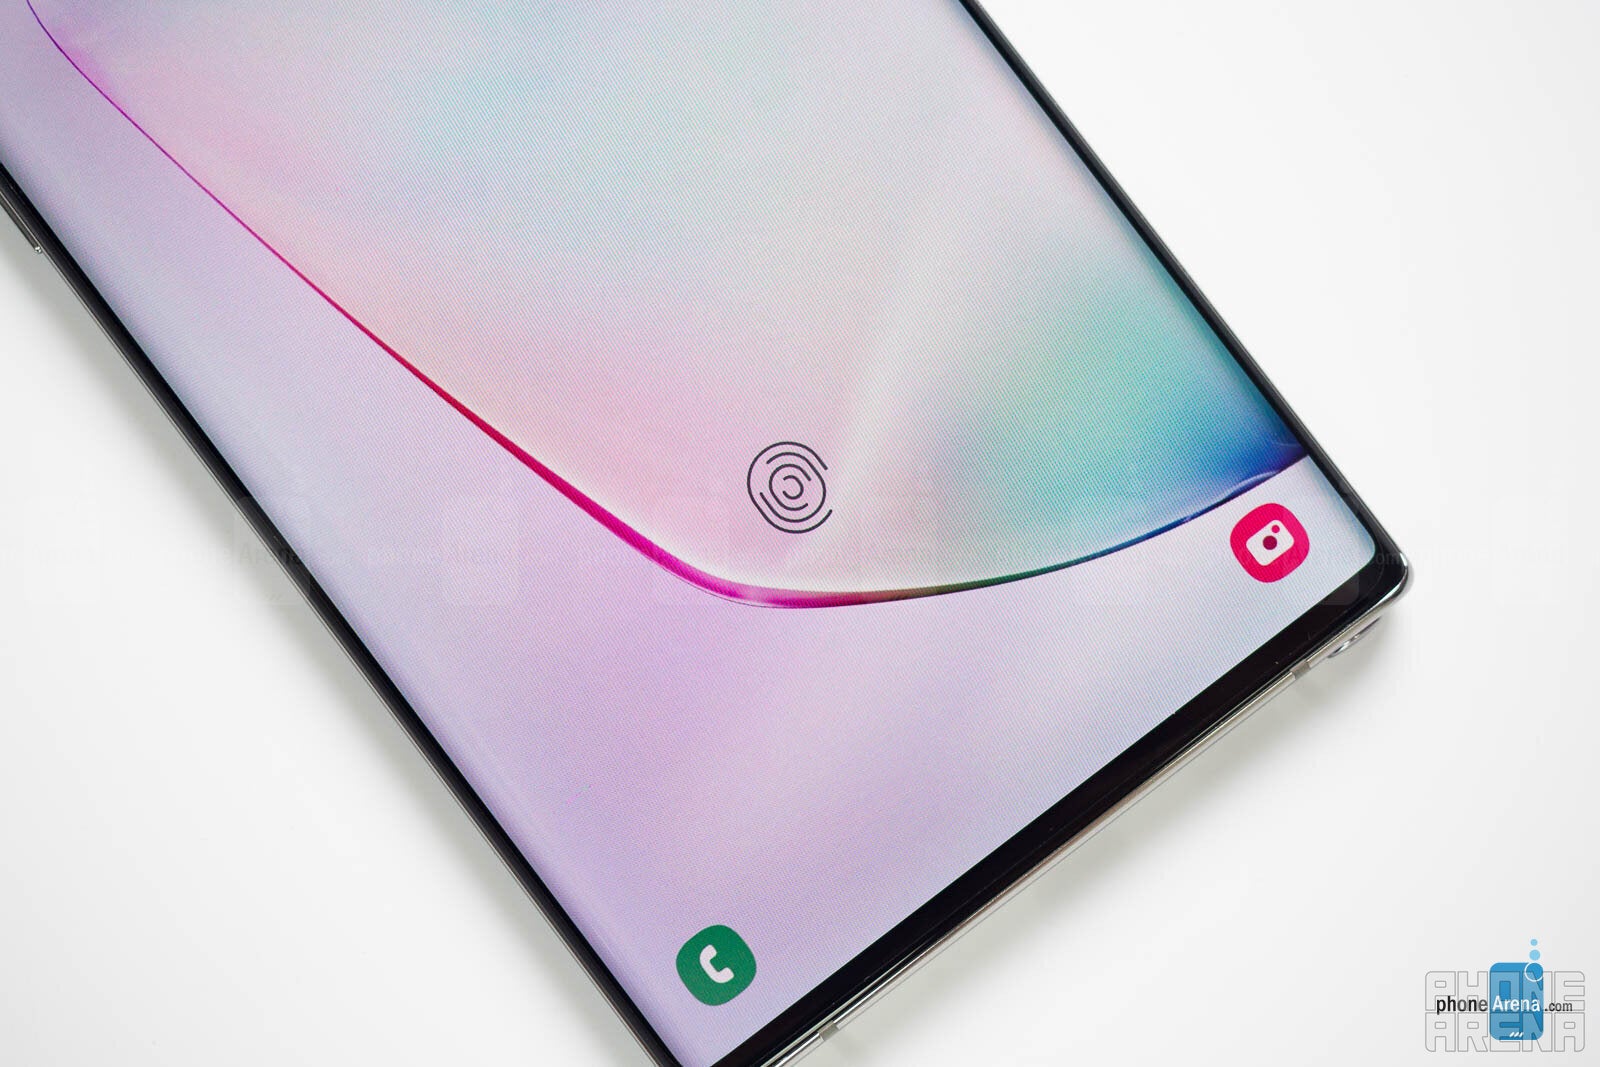 Samsung Galaxy Note 10 review: Finally, an S Pen in a smaller phone